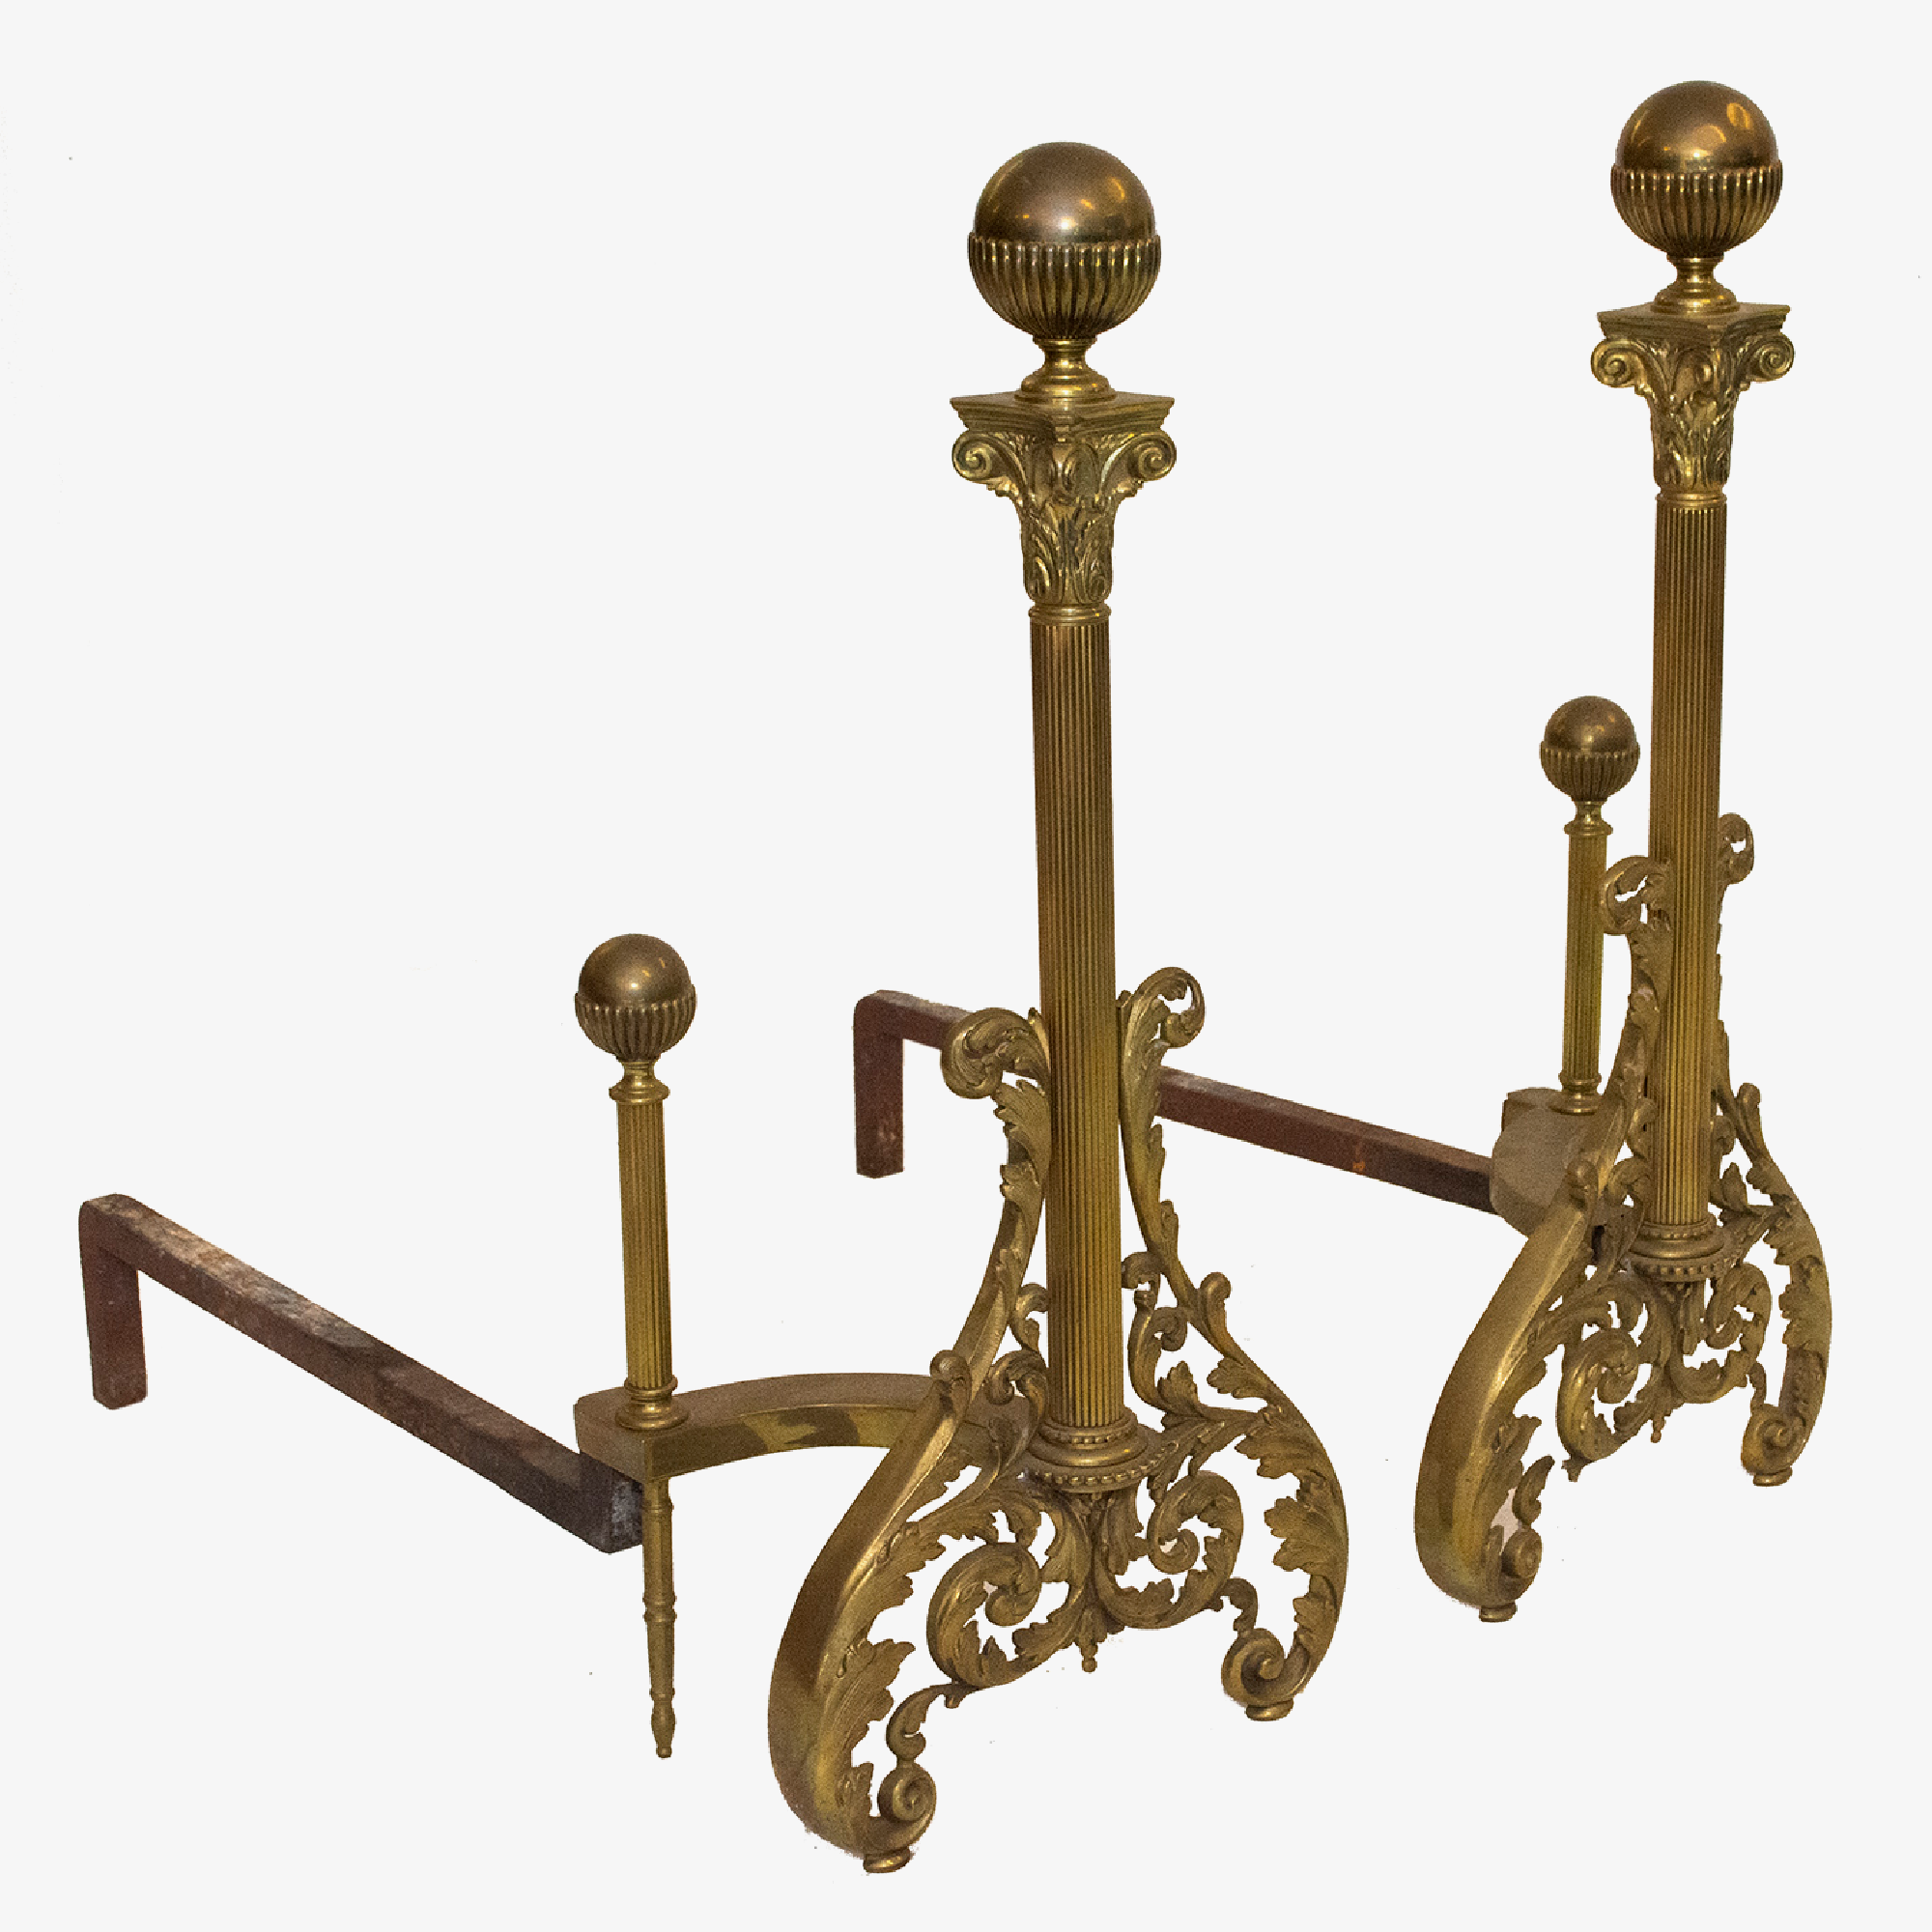 Brass and Iron Andirons2.png